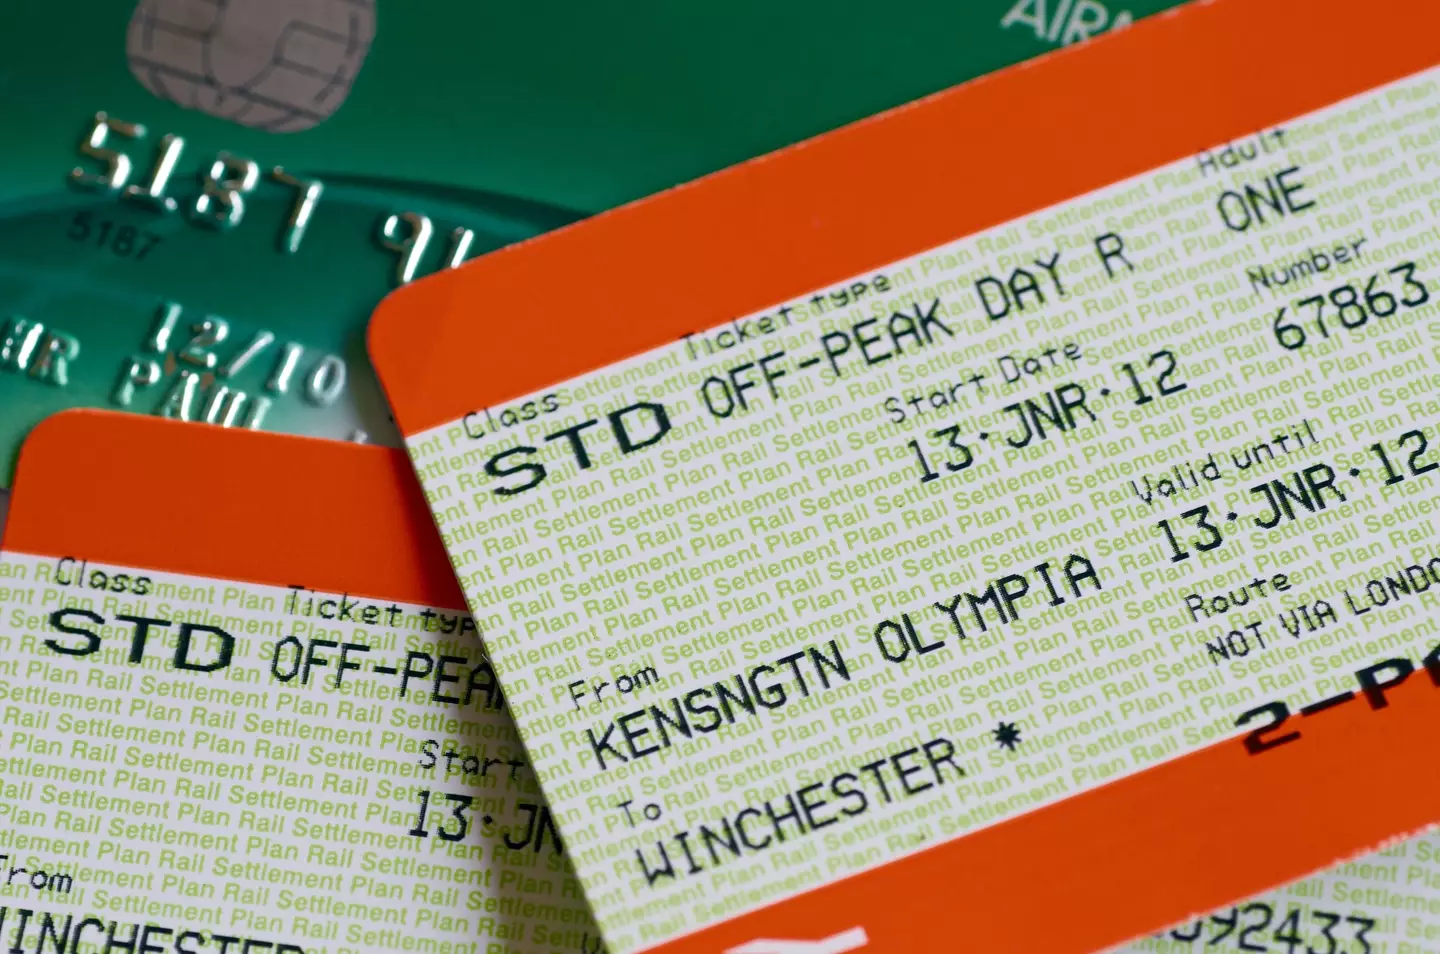 Return tickets may soon be a thing of the past across the whole rail network.